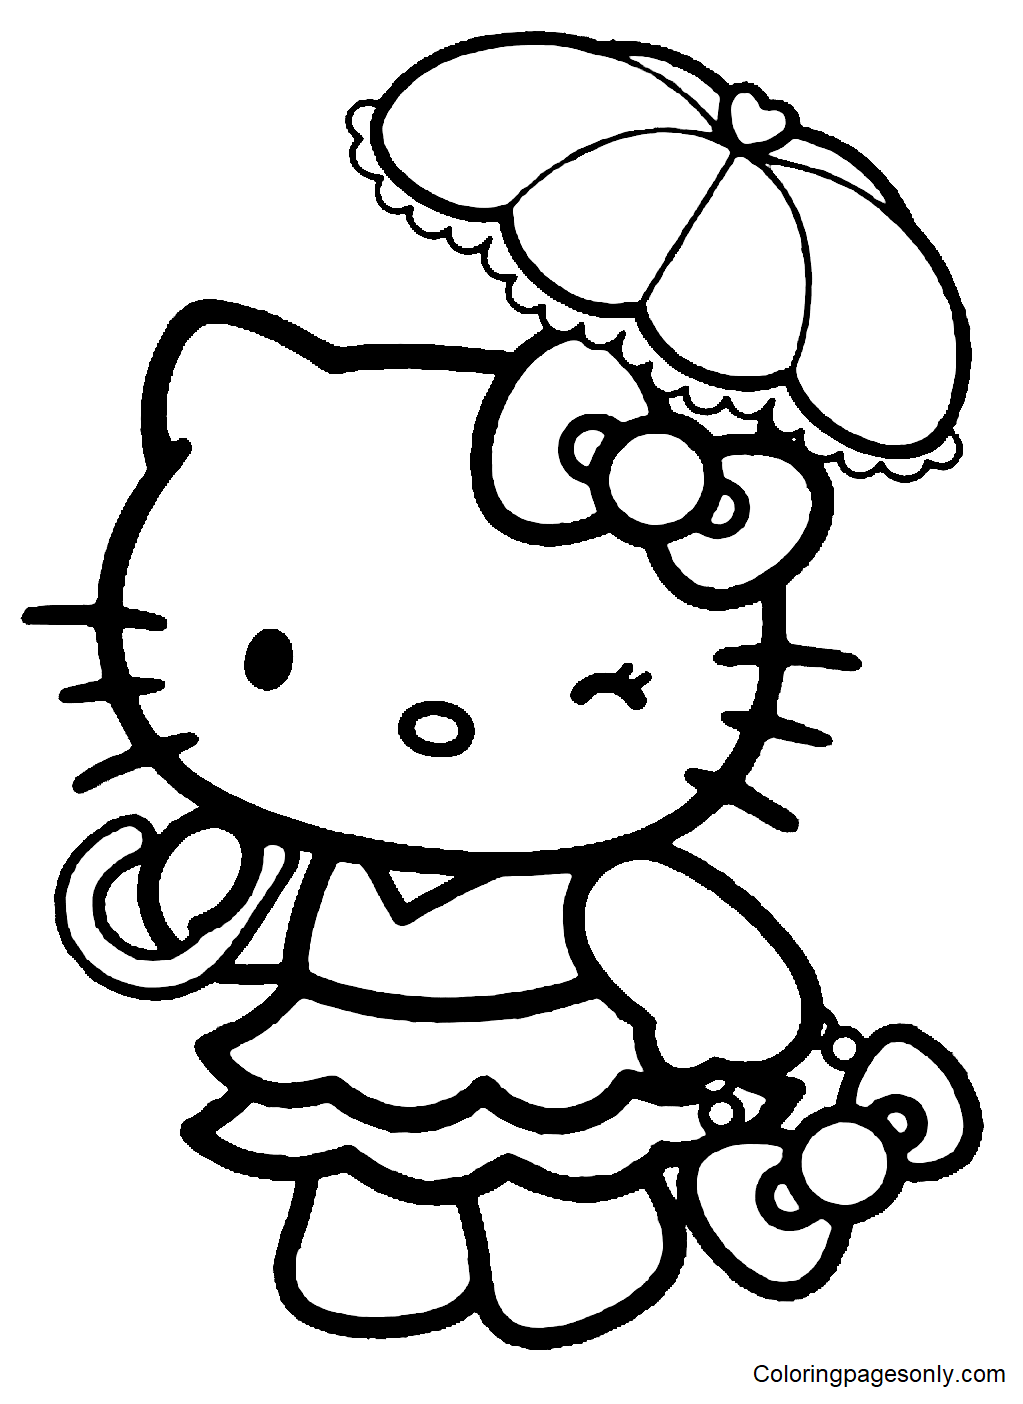 Hello Kitty Coloring Sheet Coloring Page - Free Printable Coloring Pages